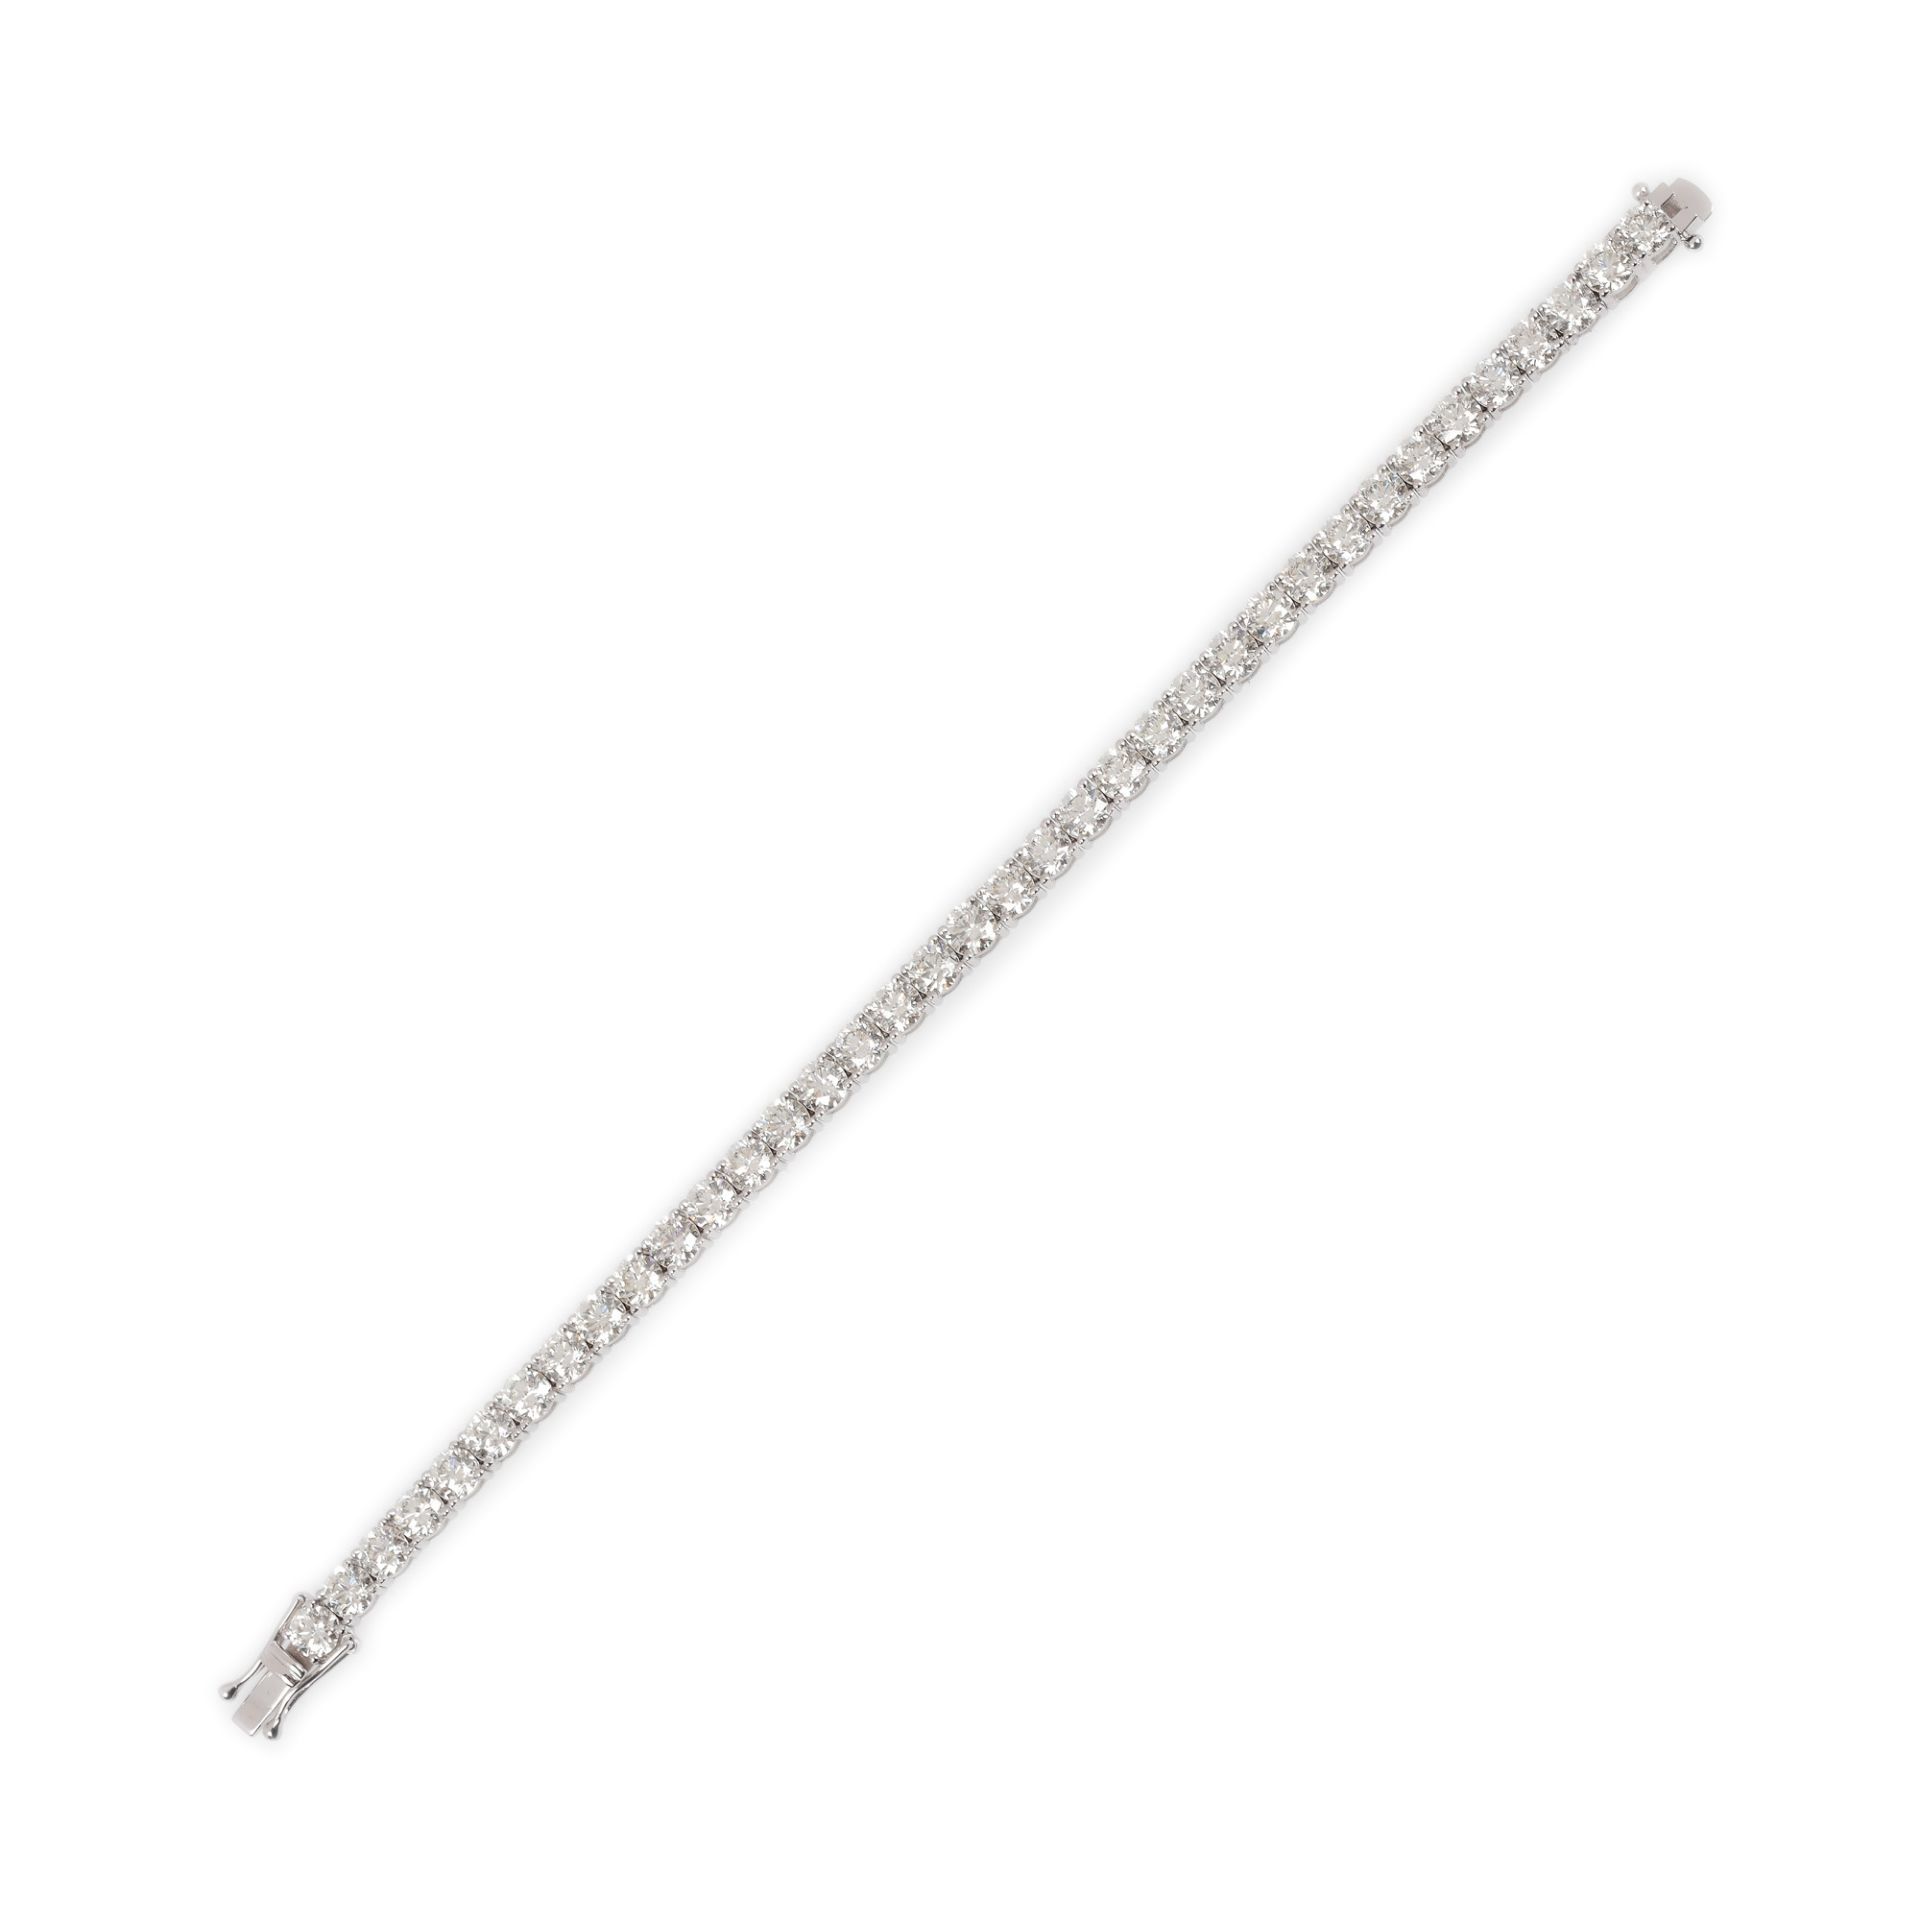 White gold tennis bracelet, paved with diamonds - Image 2 of 2